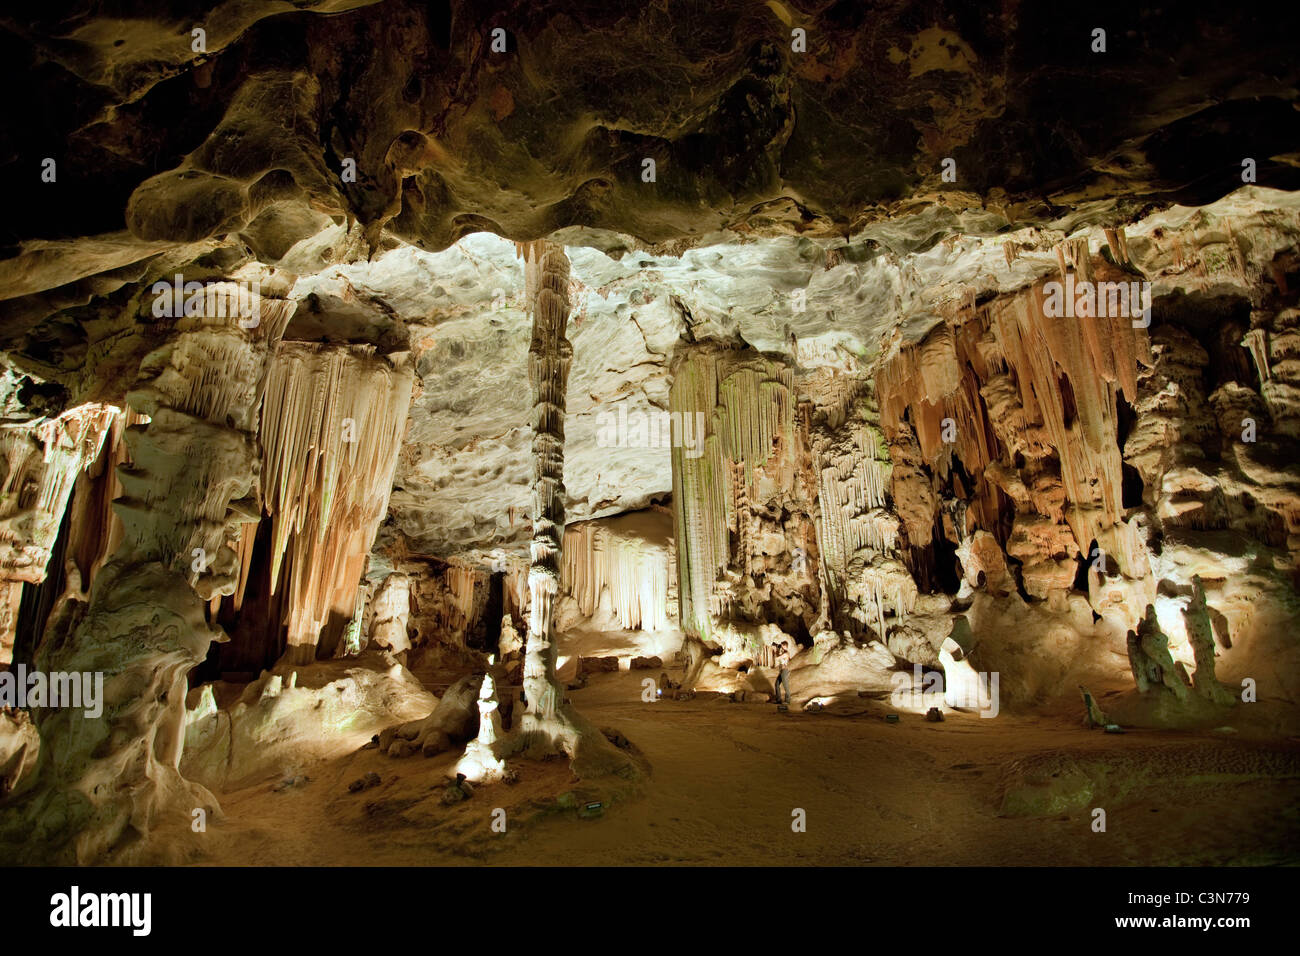 South Africa, Western Cape, near Oudtshoorn, Cango Caves. Stock Photo